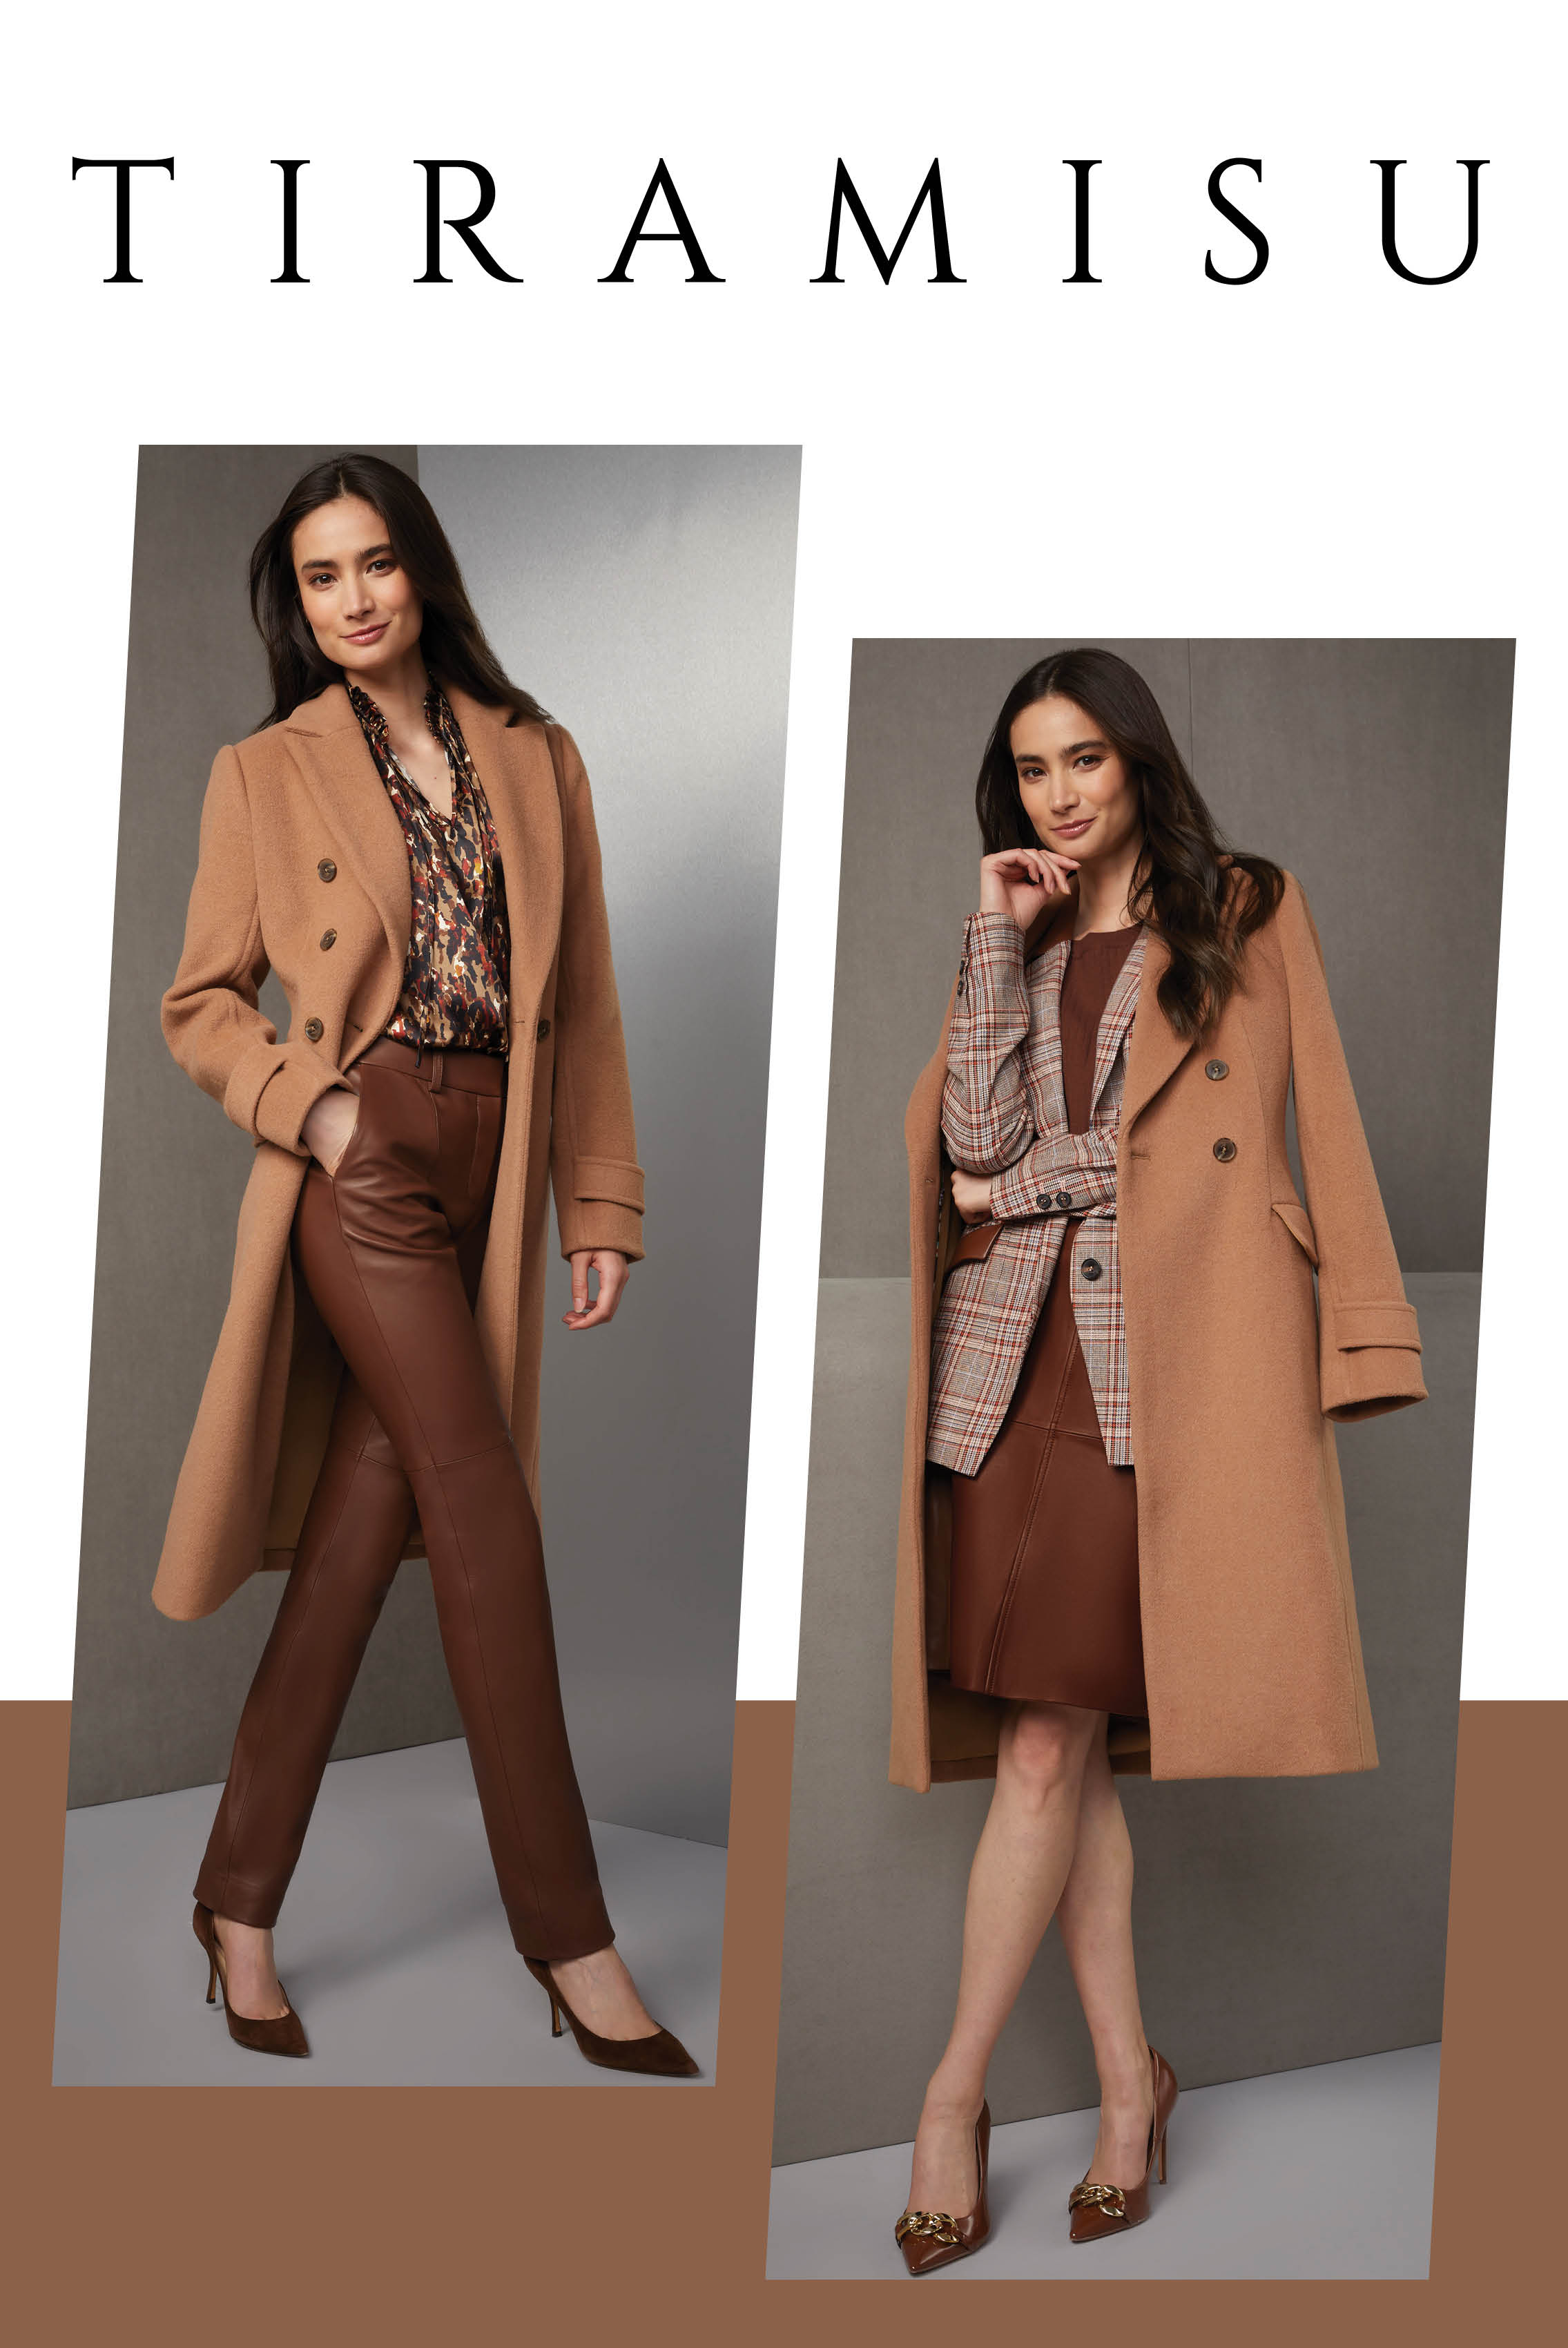 This meticulously coordinated outfit harmonizes the warm camel ground of a stretch silk satin leopard print blouse with a tailored wool coat in a matching hue. The blouse print also contains deep caramel which is cohesive with the matching pants.